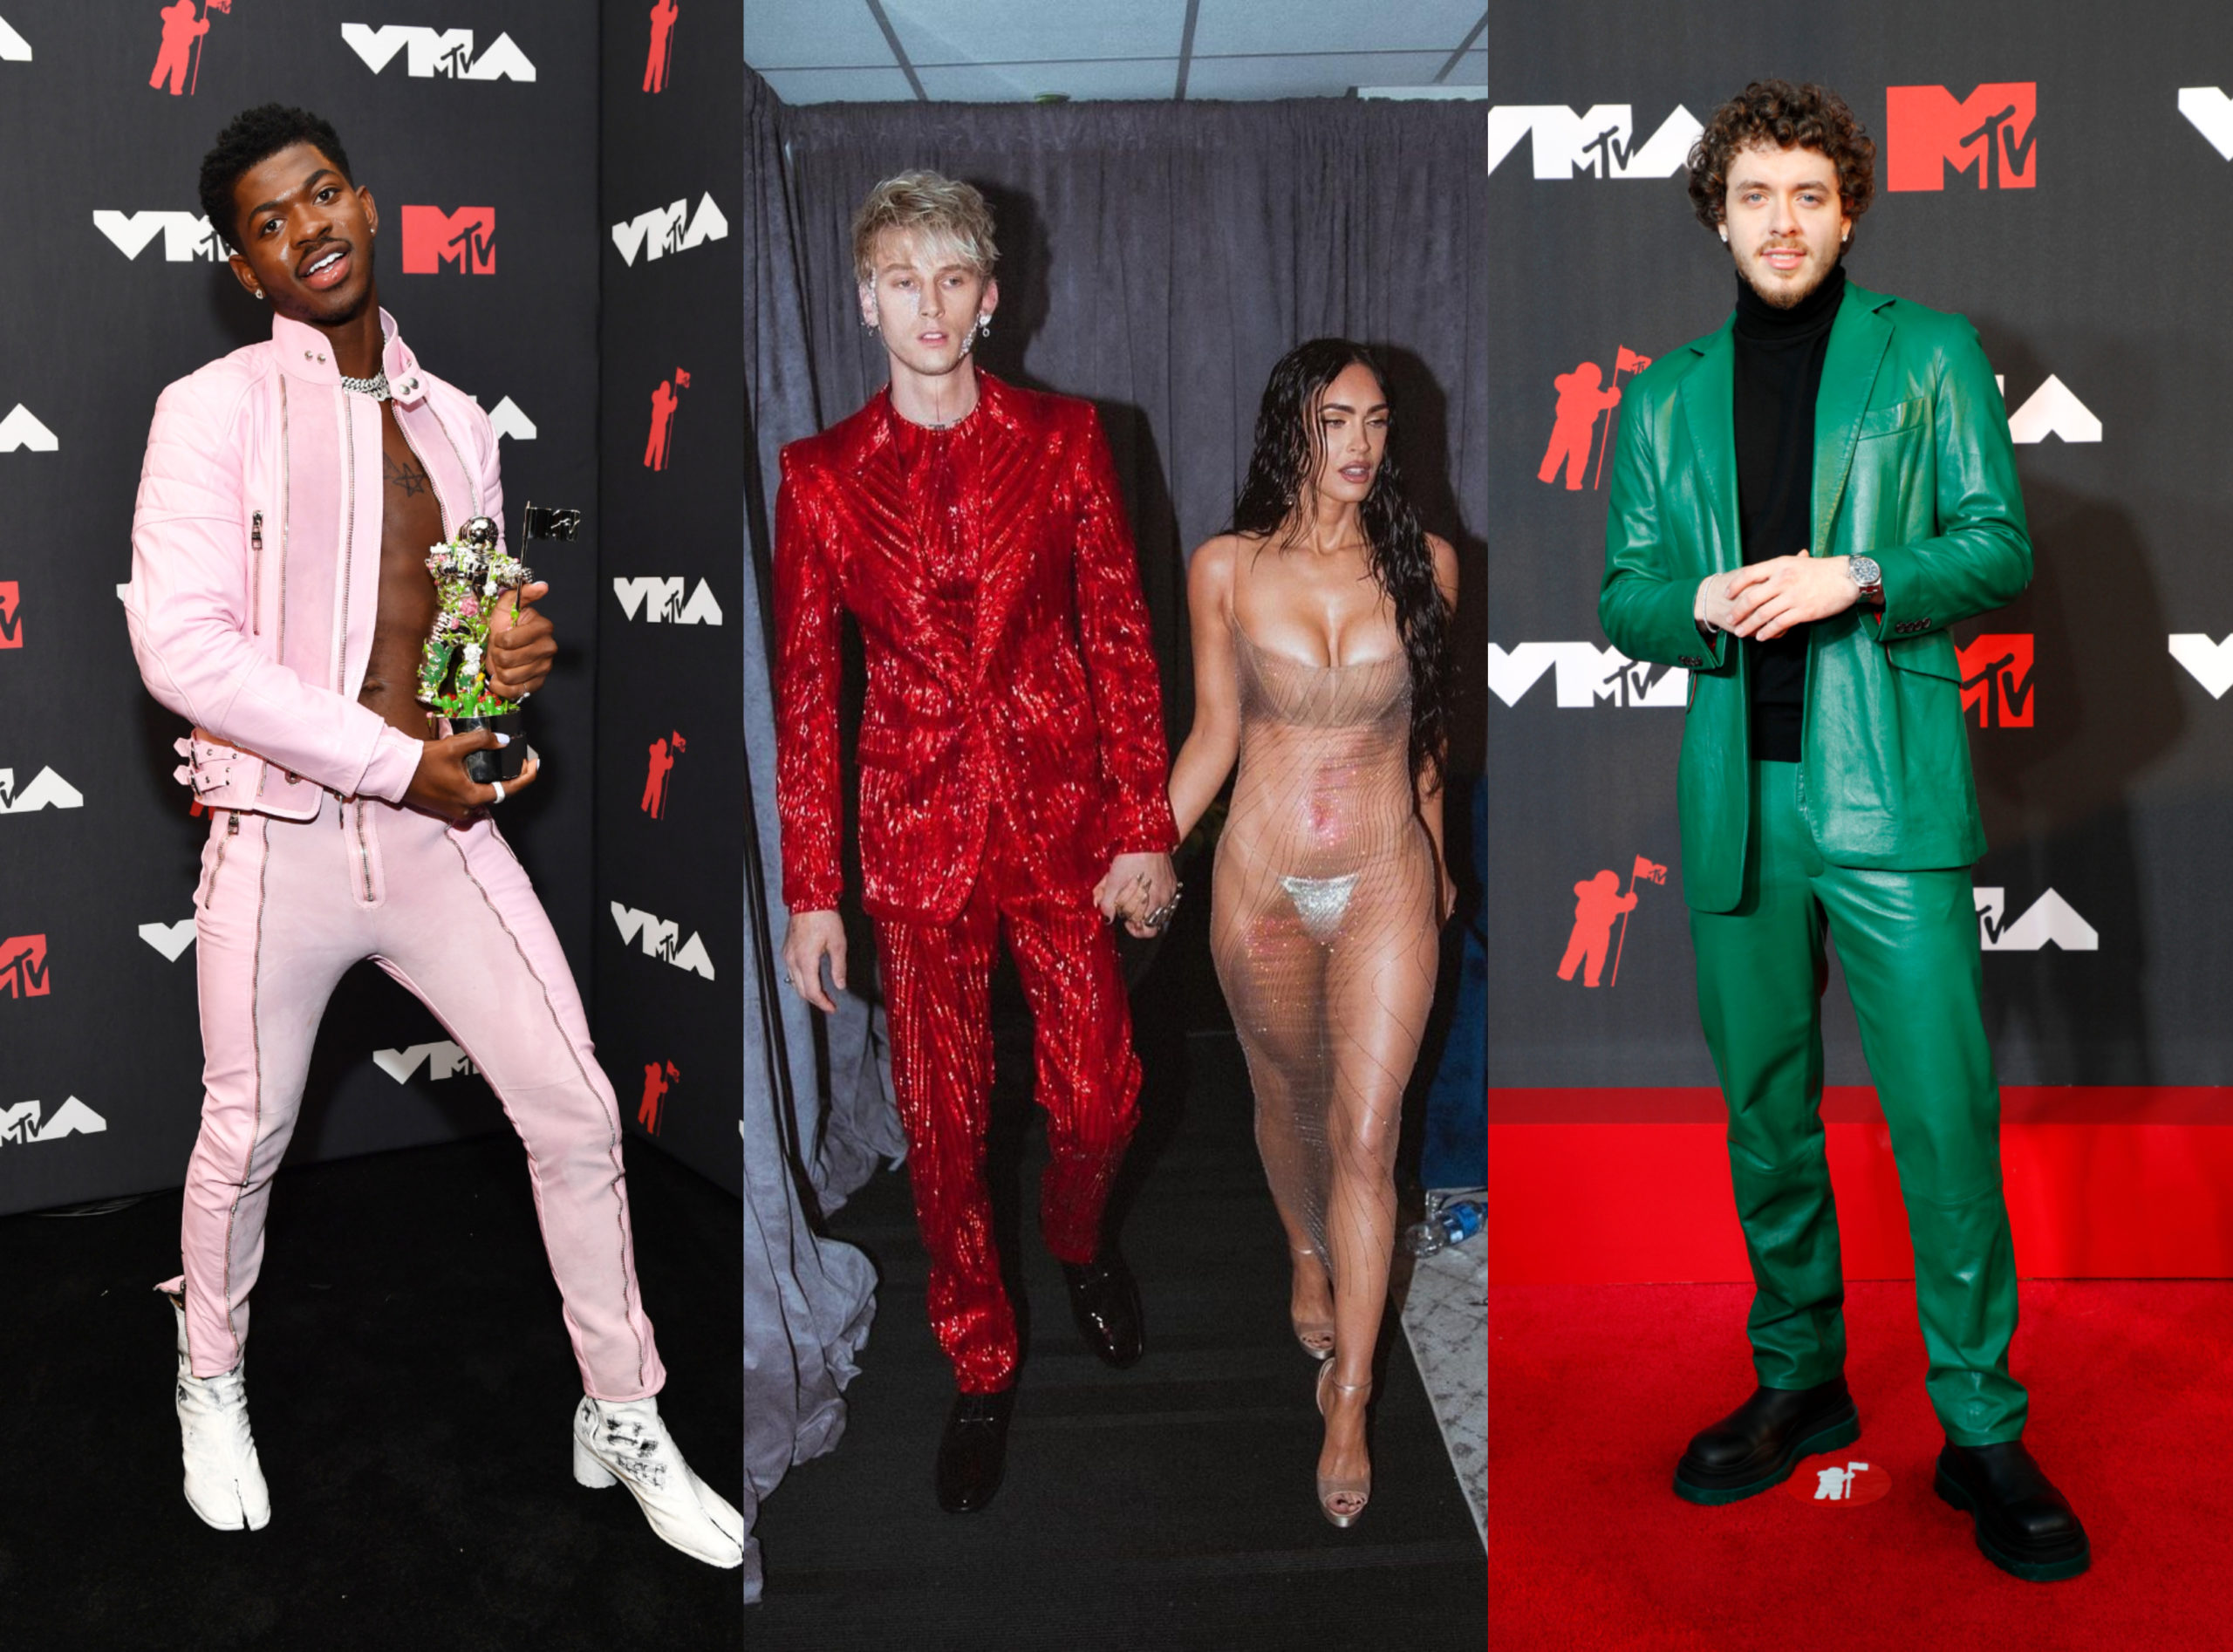 SPOTTED: Jack Harlow, Lil Nas X and More at the VMA Awards 2021